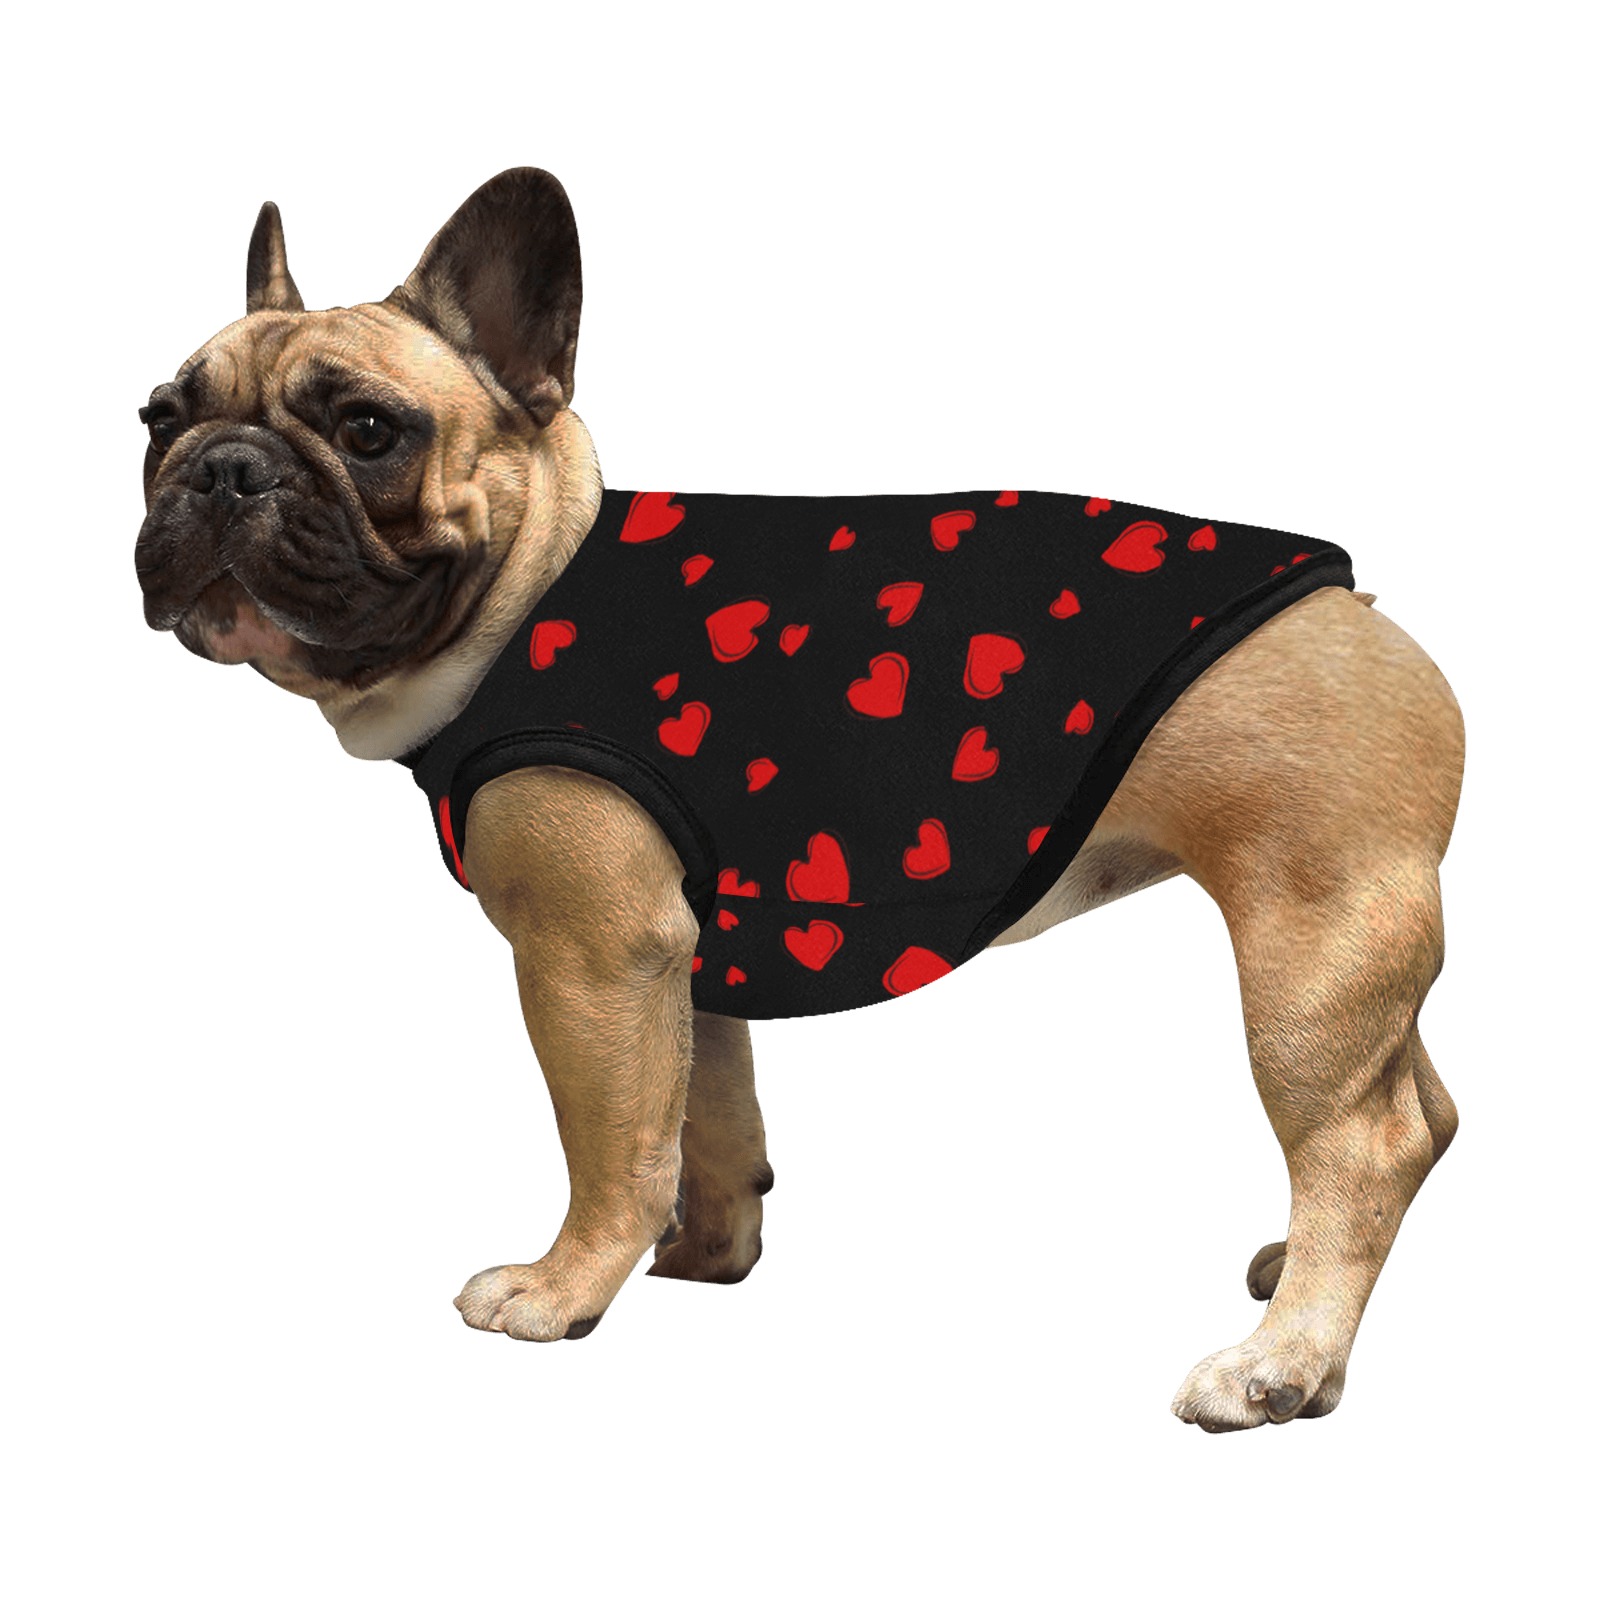 Red Hearts Floating on Black All Over Print Pet Tank Top